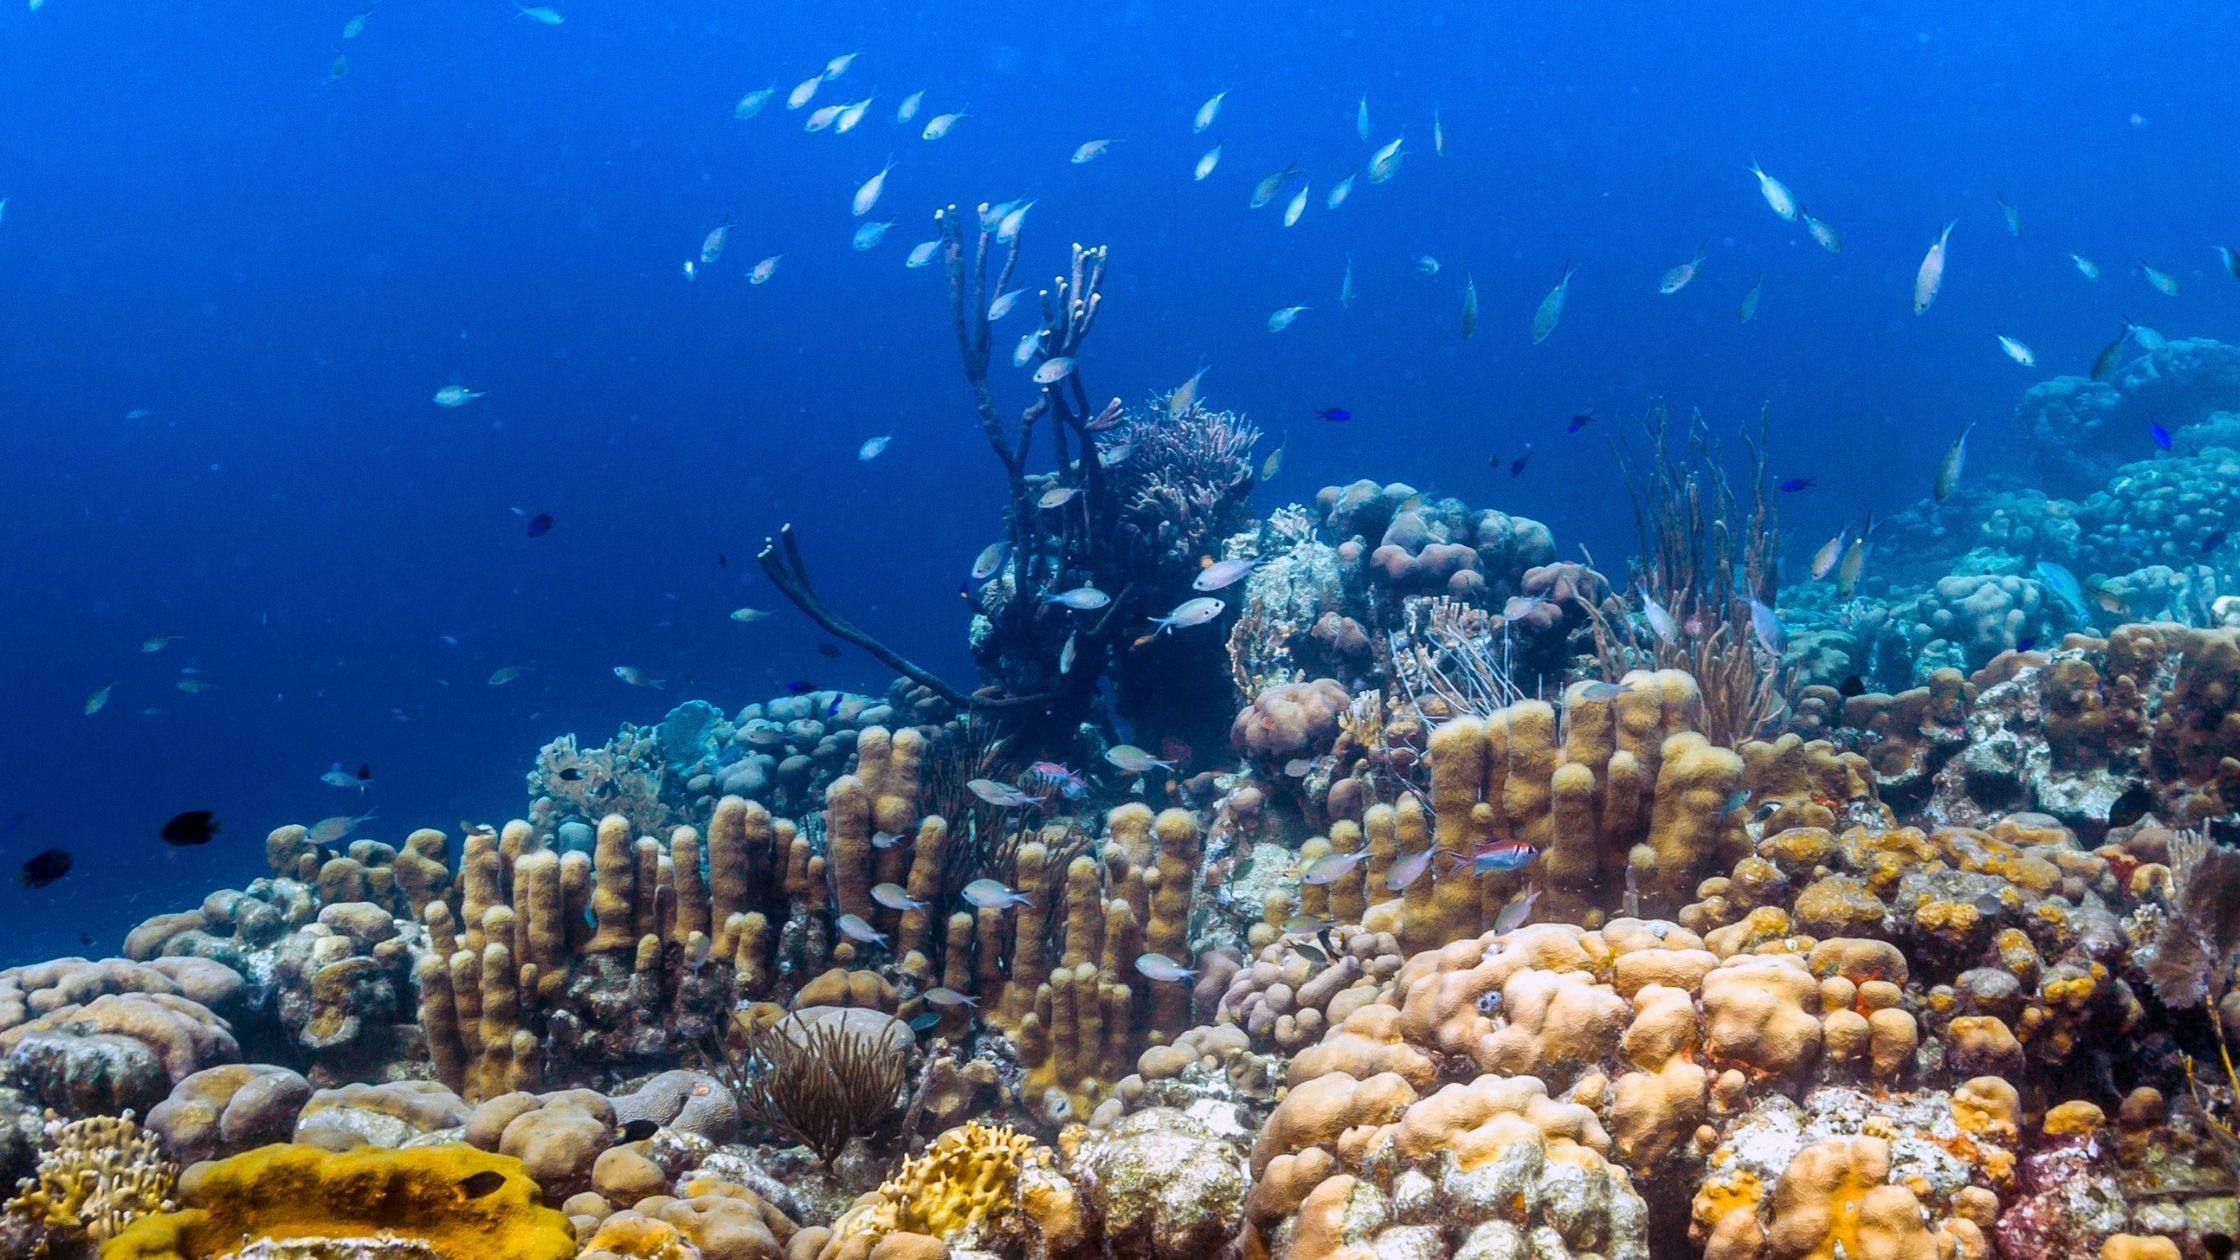 A picture of coral in the Bonaire reef.